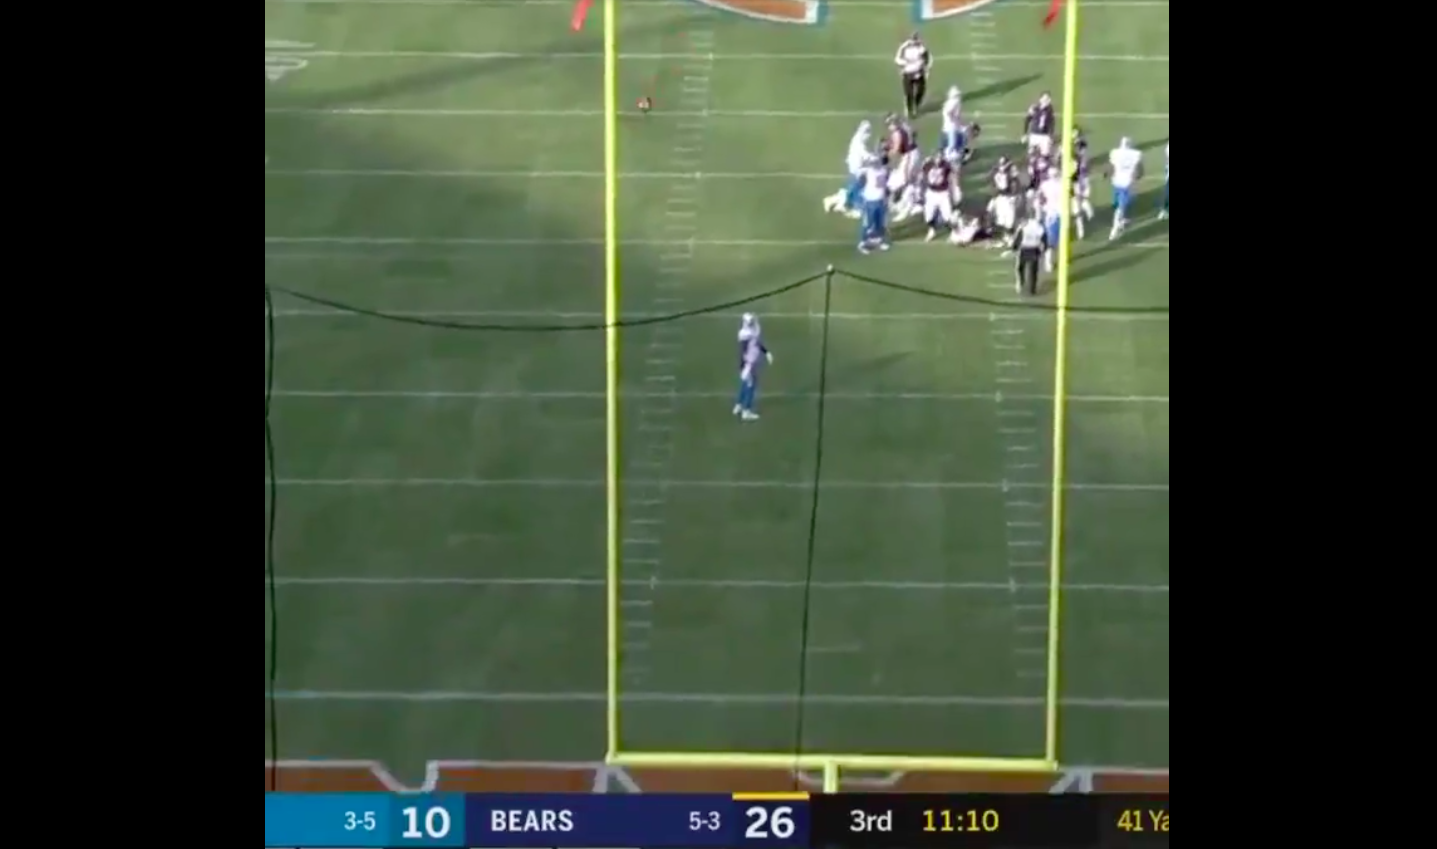 Bears K Cody Parkey Hit The Upright On Four Missed Field Goal